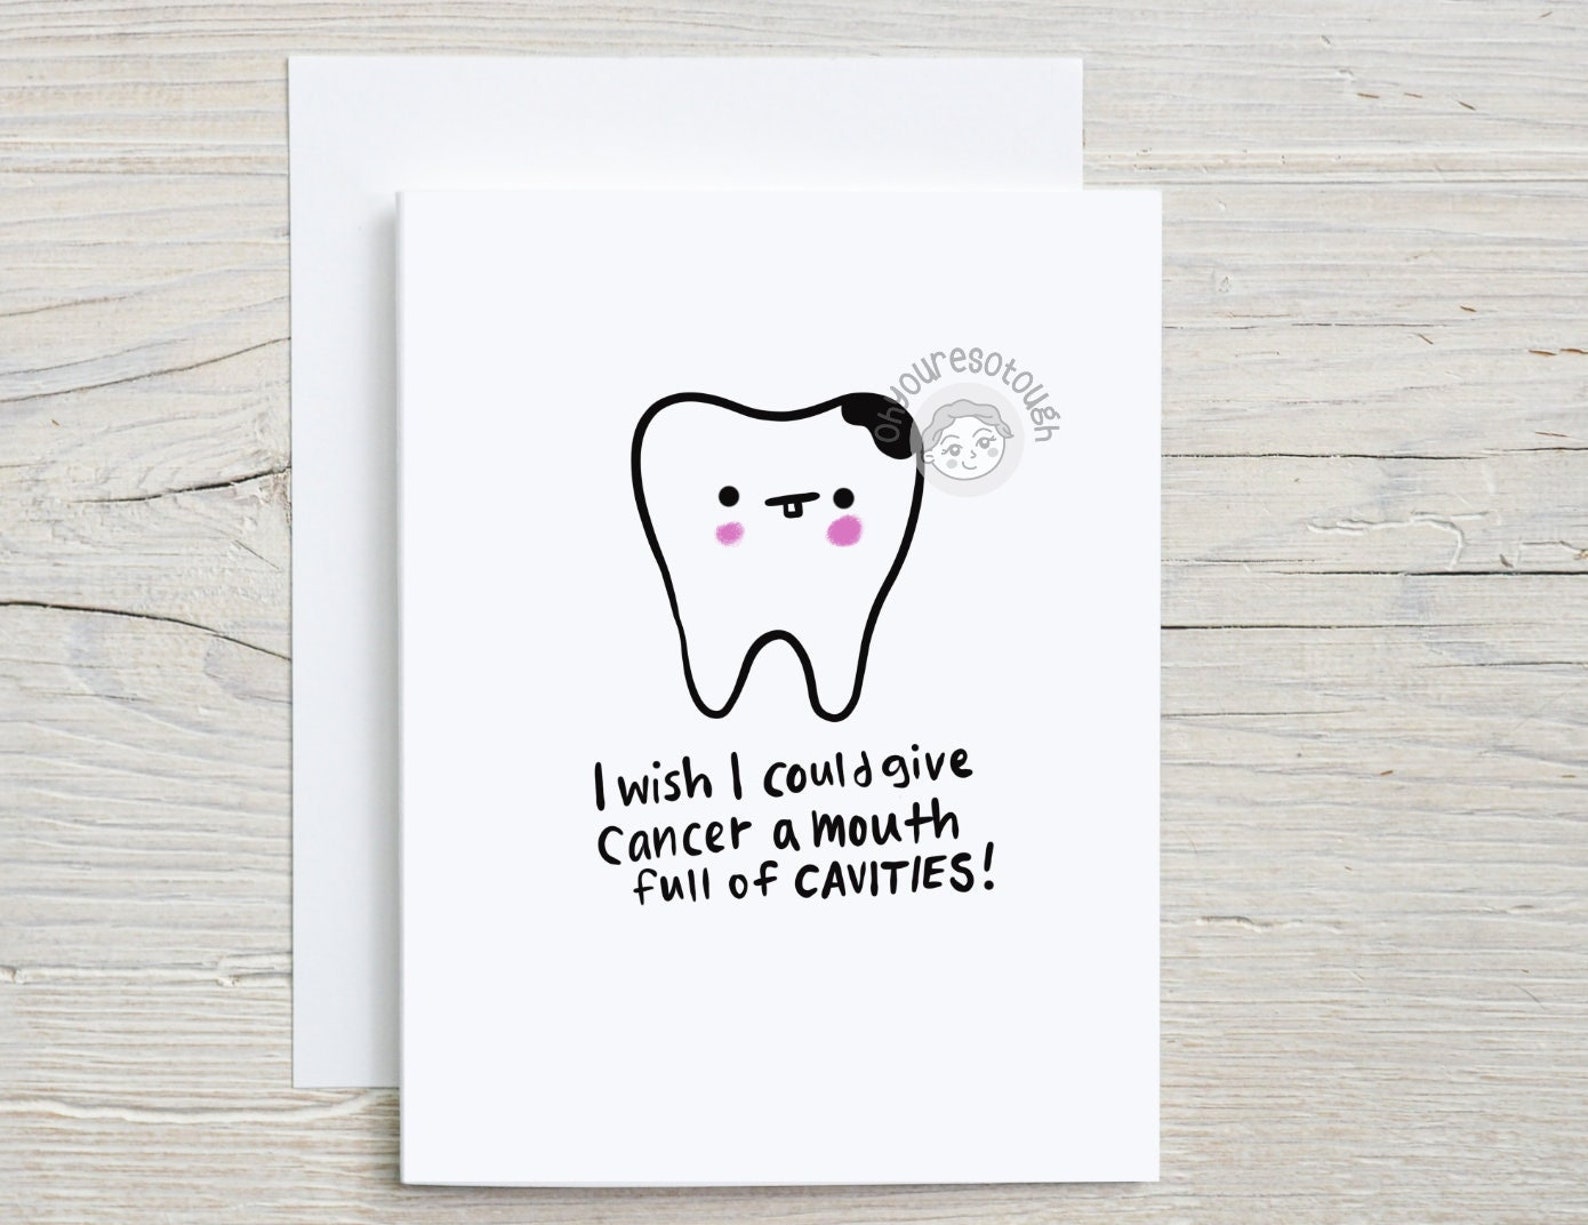 Cancer Support Card Funny - Cancer Cavities - Cancer Encouragement - Cancer Fighter - Chemo Gift - Cancer Card - Chemo Card